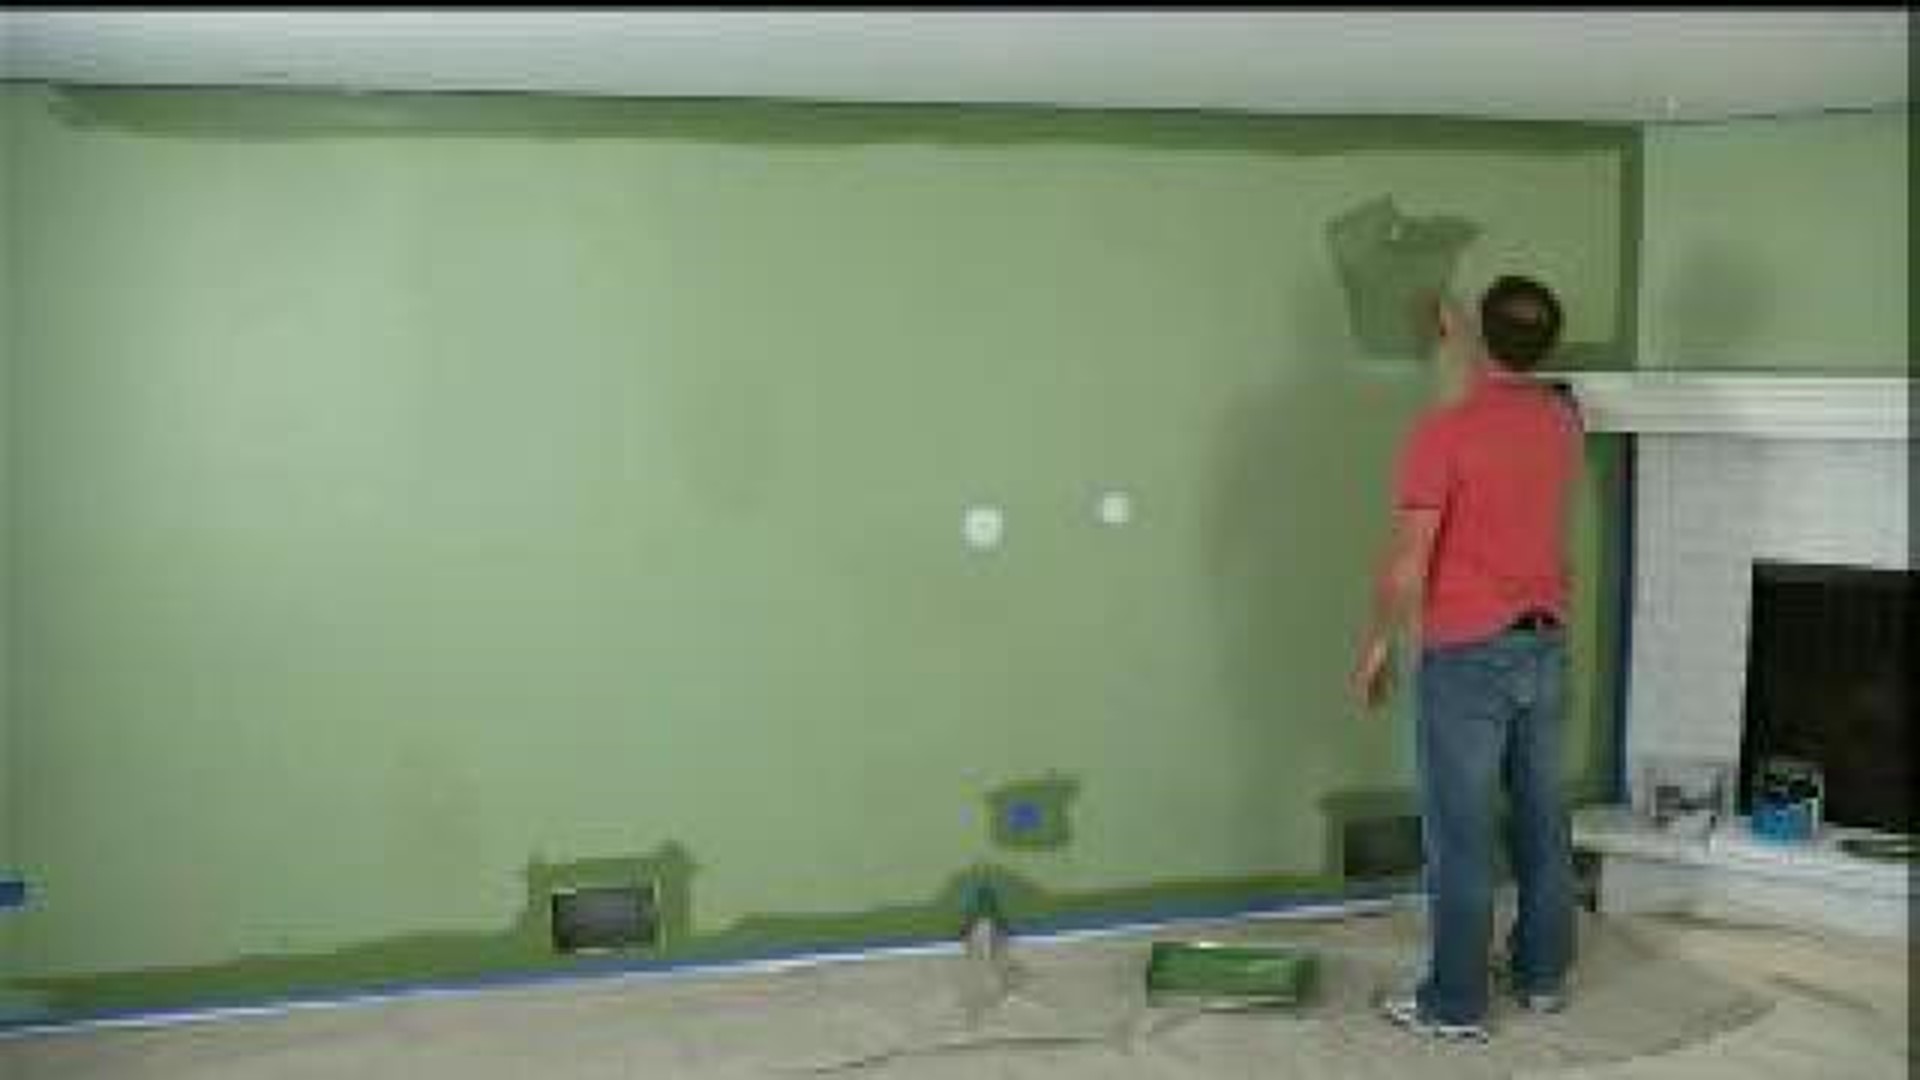 Consumers could pay more for paint in Illinois